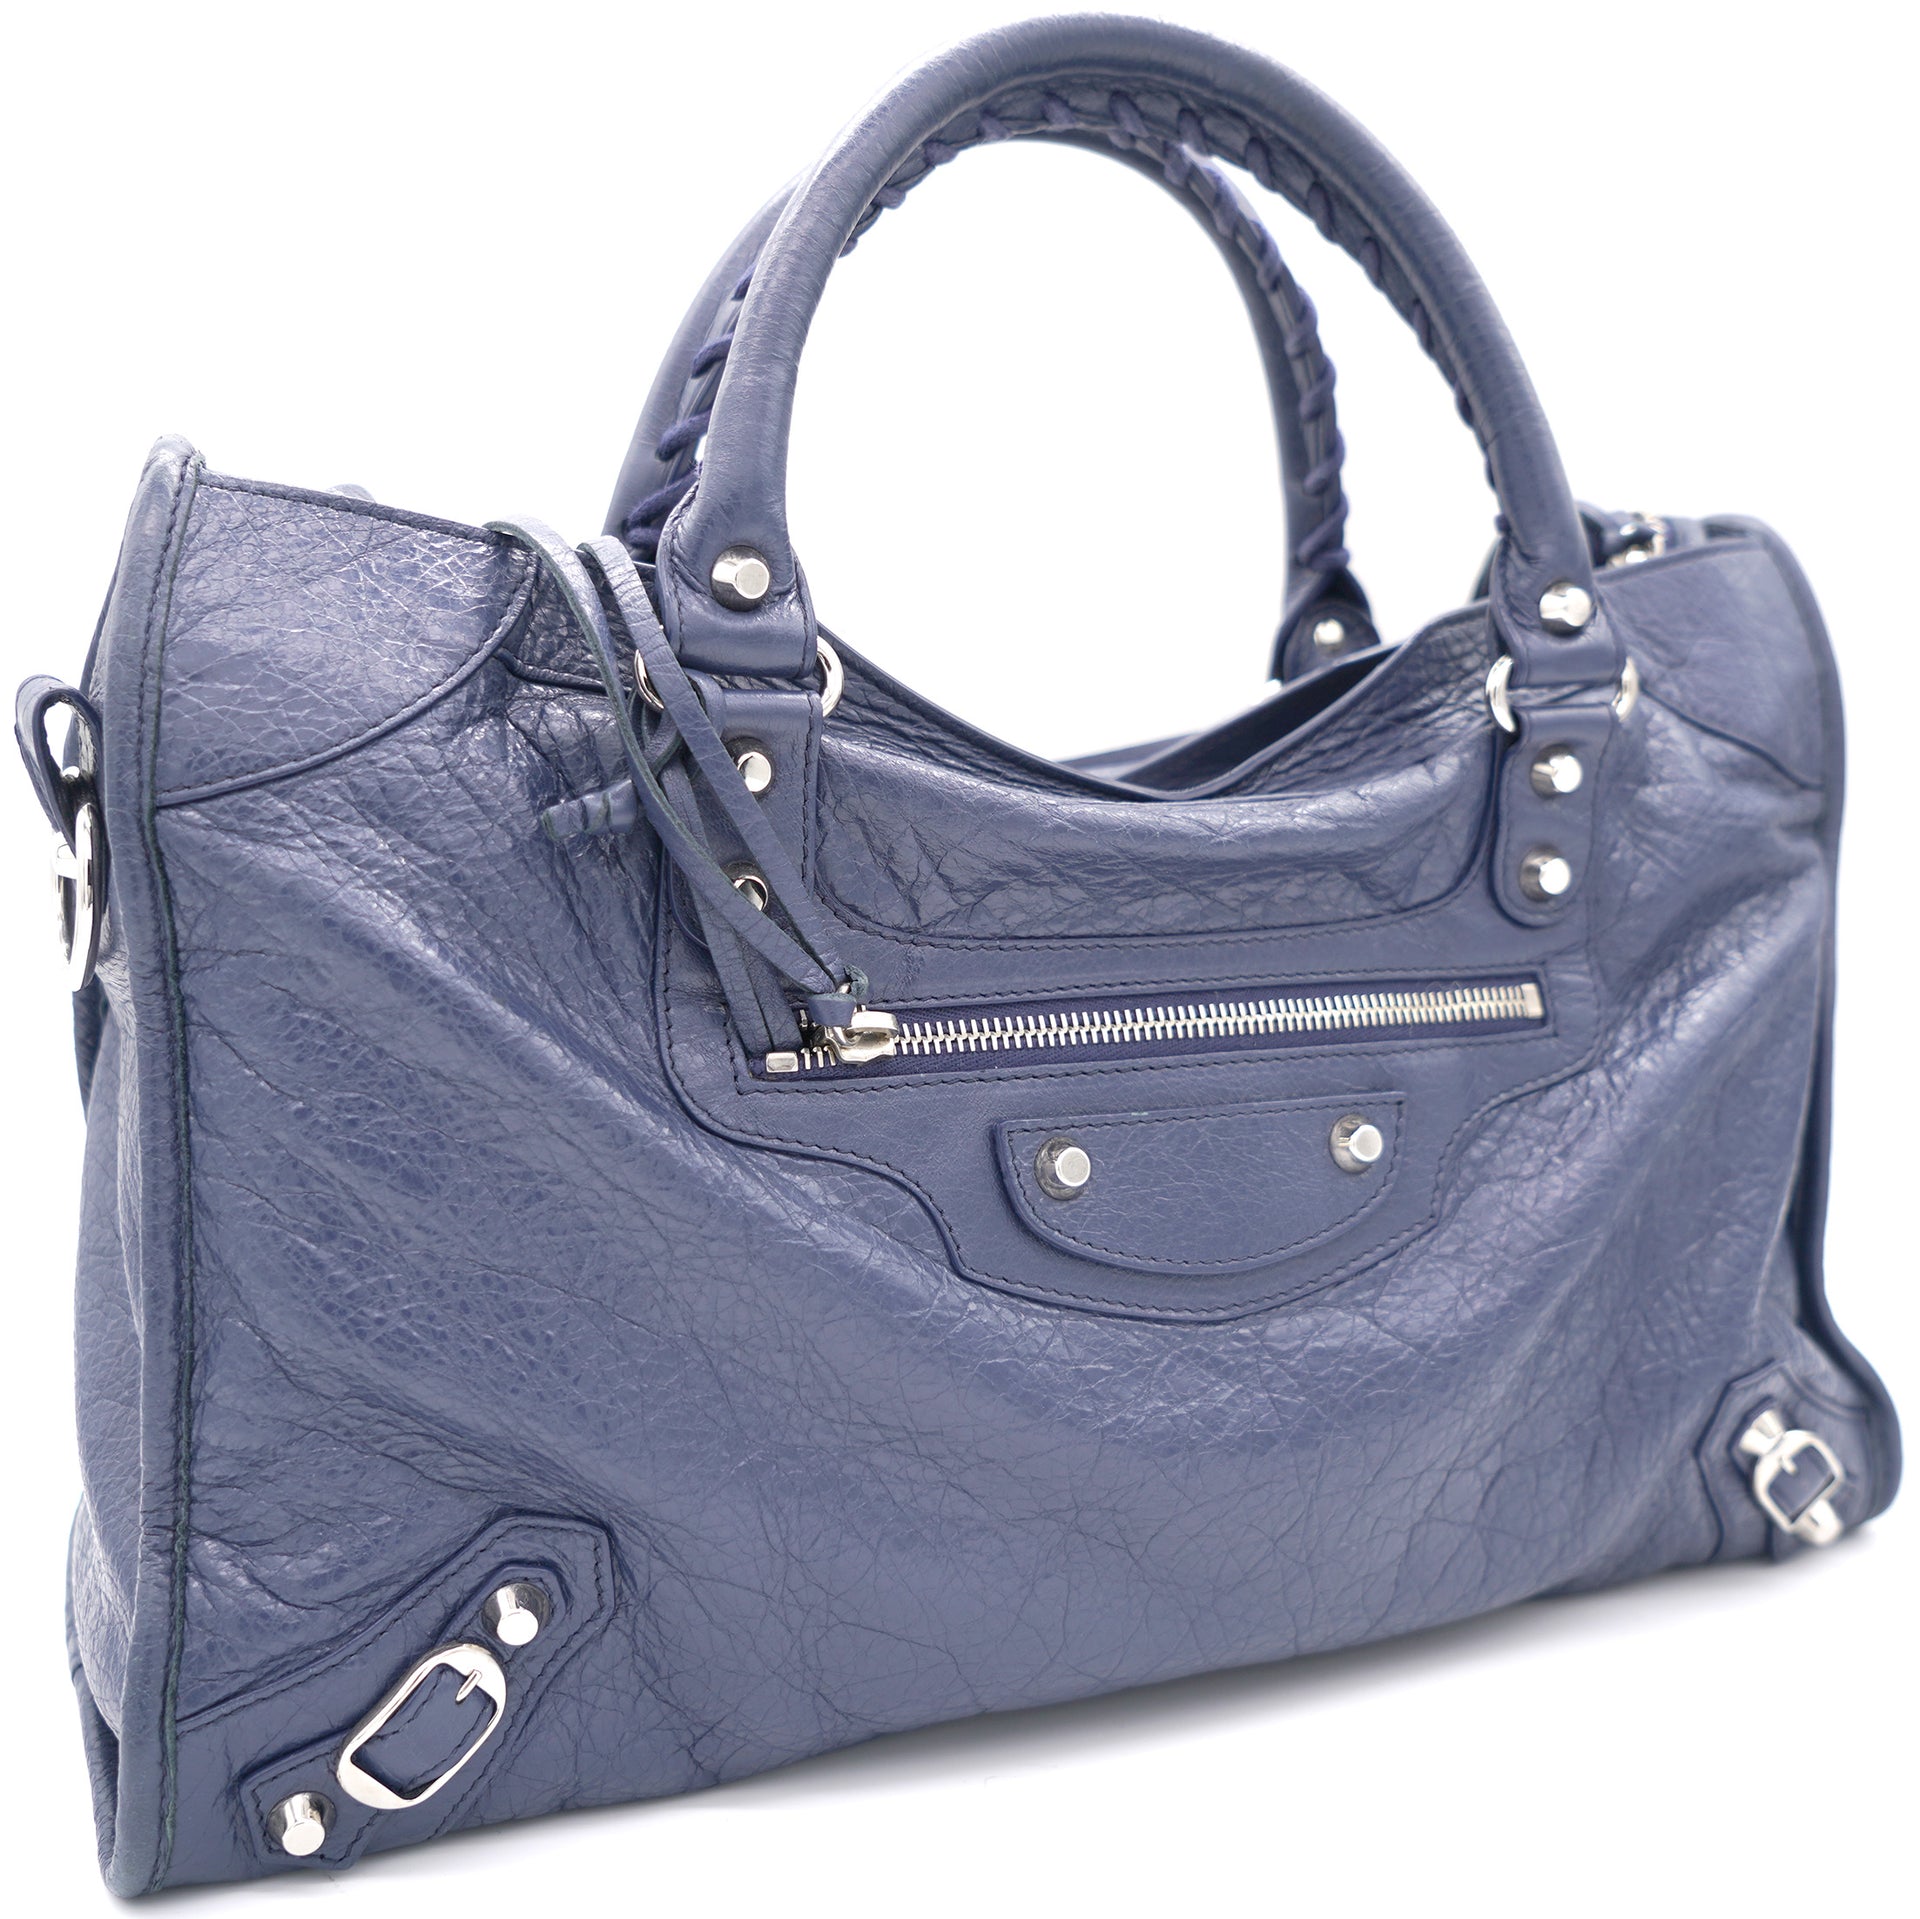 Blue Lambskin Leather Motorcycle City Bag